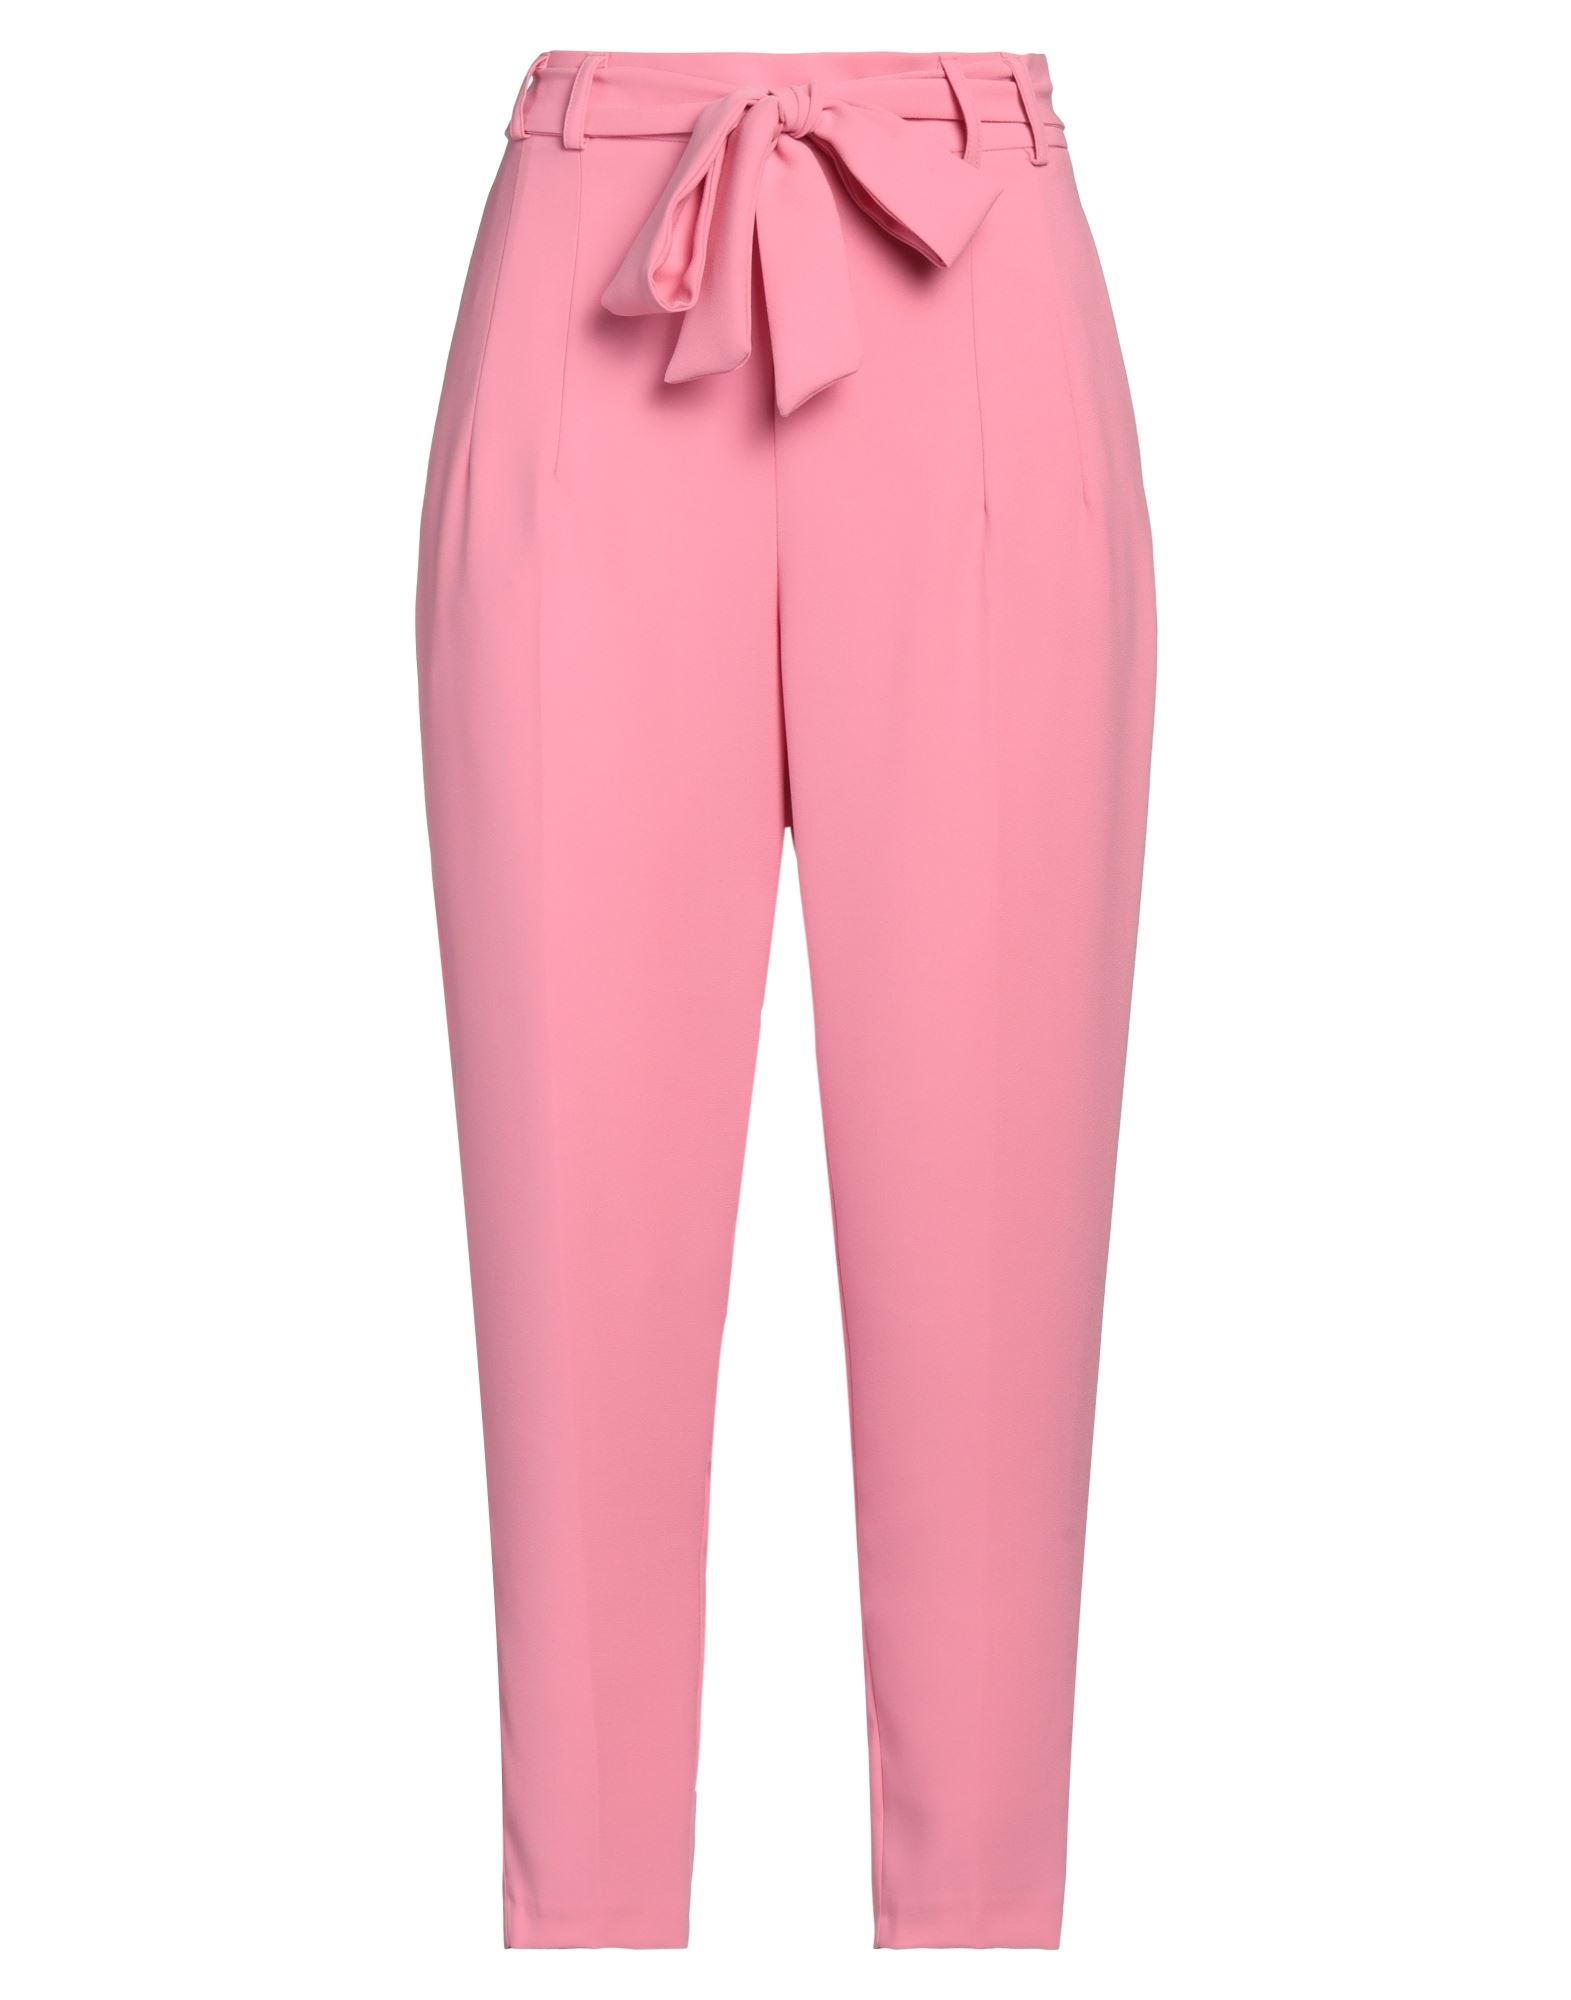 Access Fashion Pants In Pink